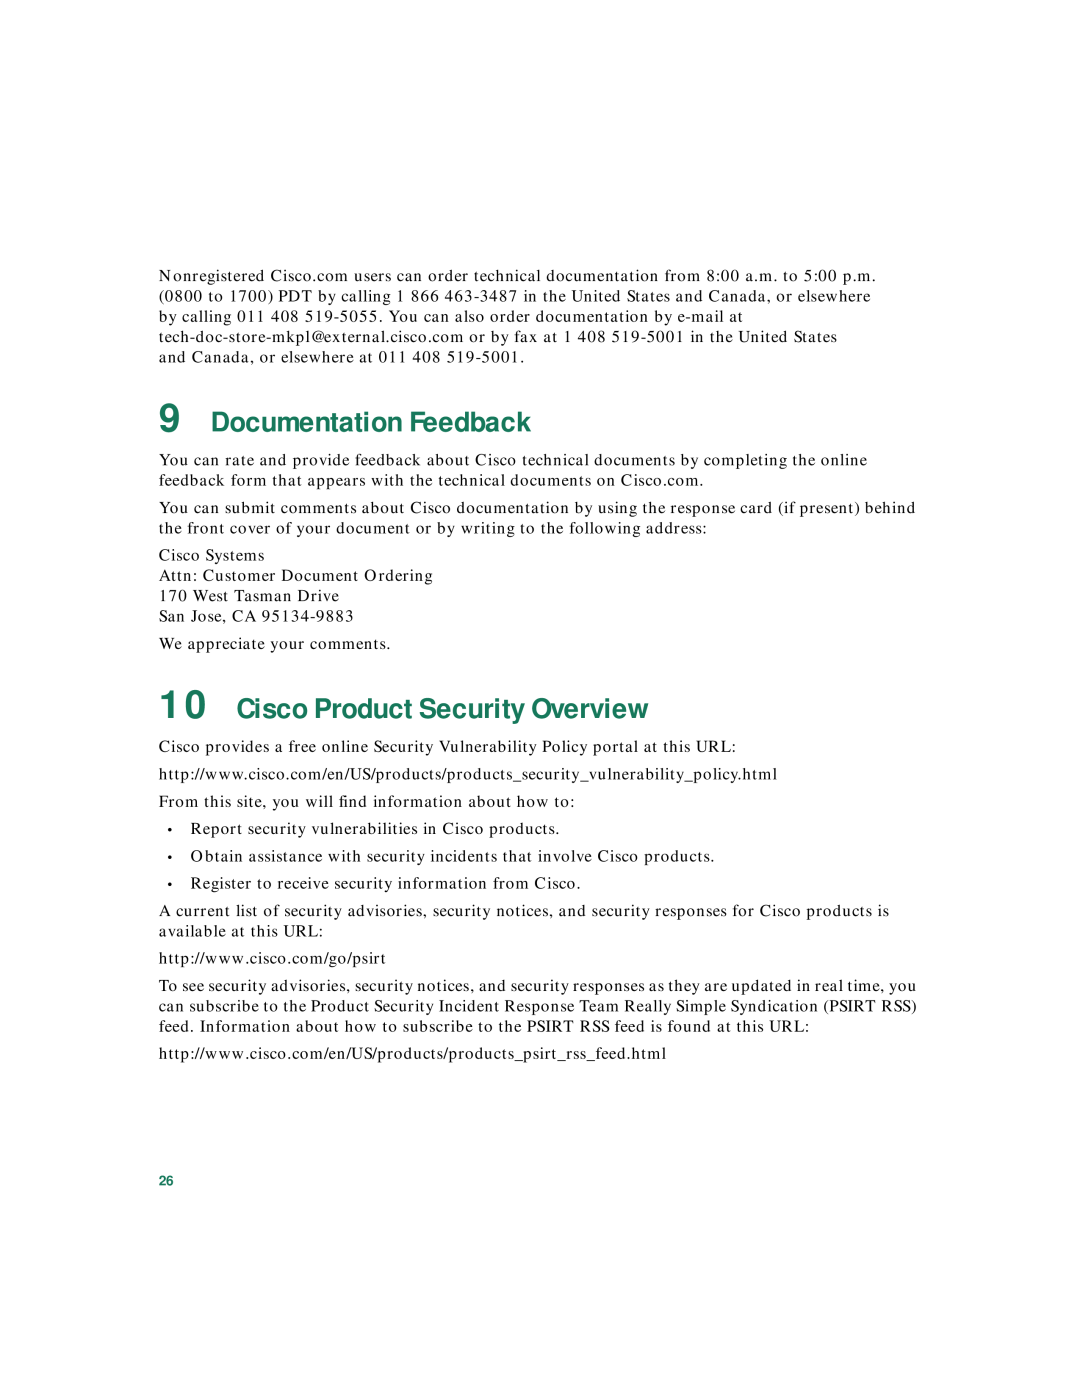 Cisco Systems 3020 warranty Documentation Feedback, Cisco Product Security Overview 